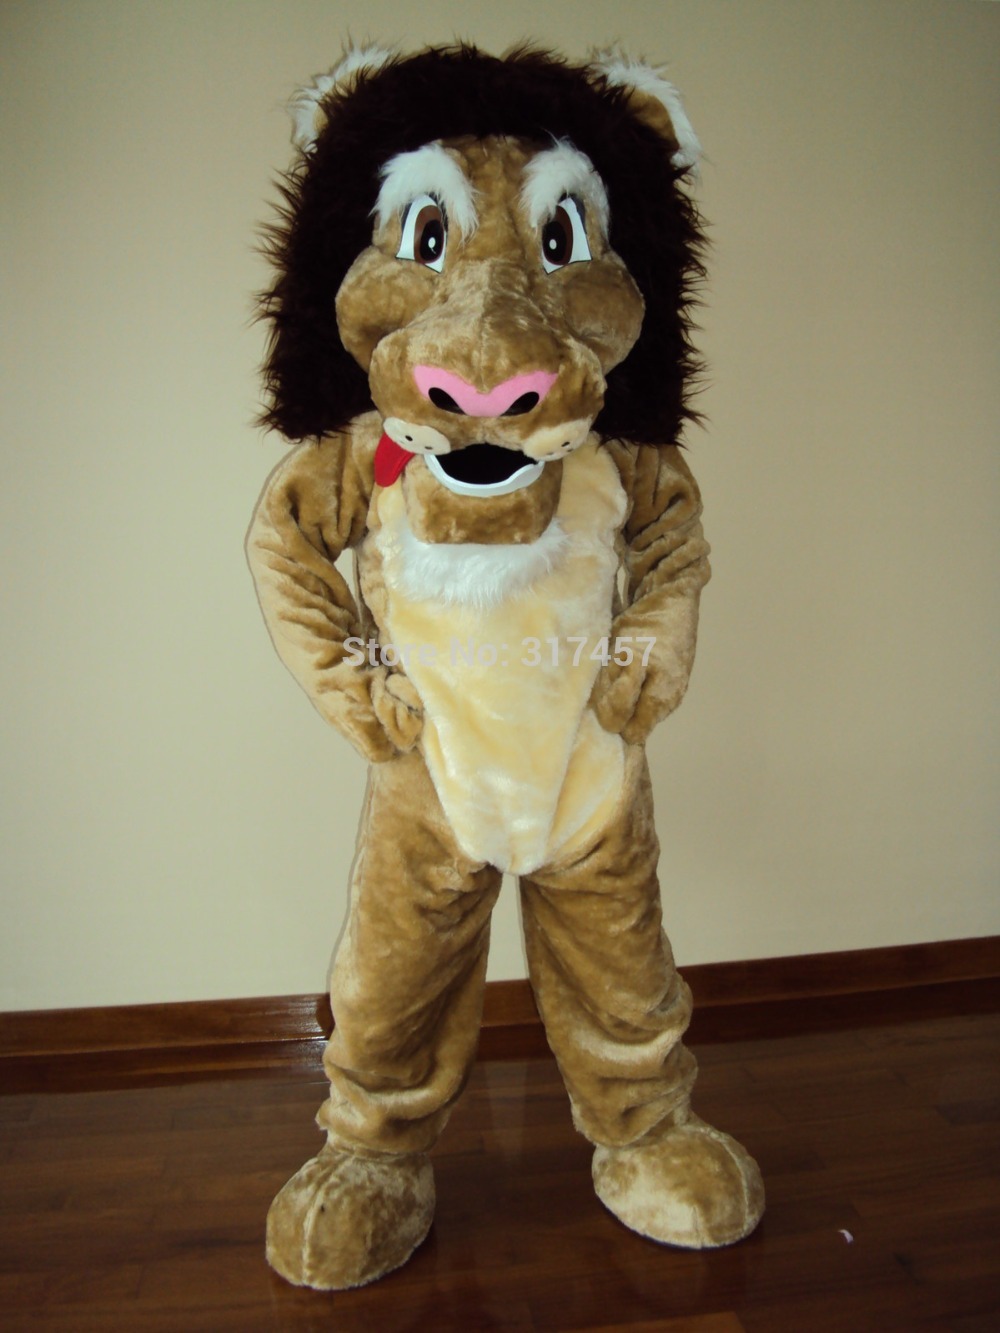 dress Adult diy ARRIVE Dress,Party costumes Fancy   THE JUNGLE 2014  LION NEW animal jungle FROM